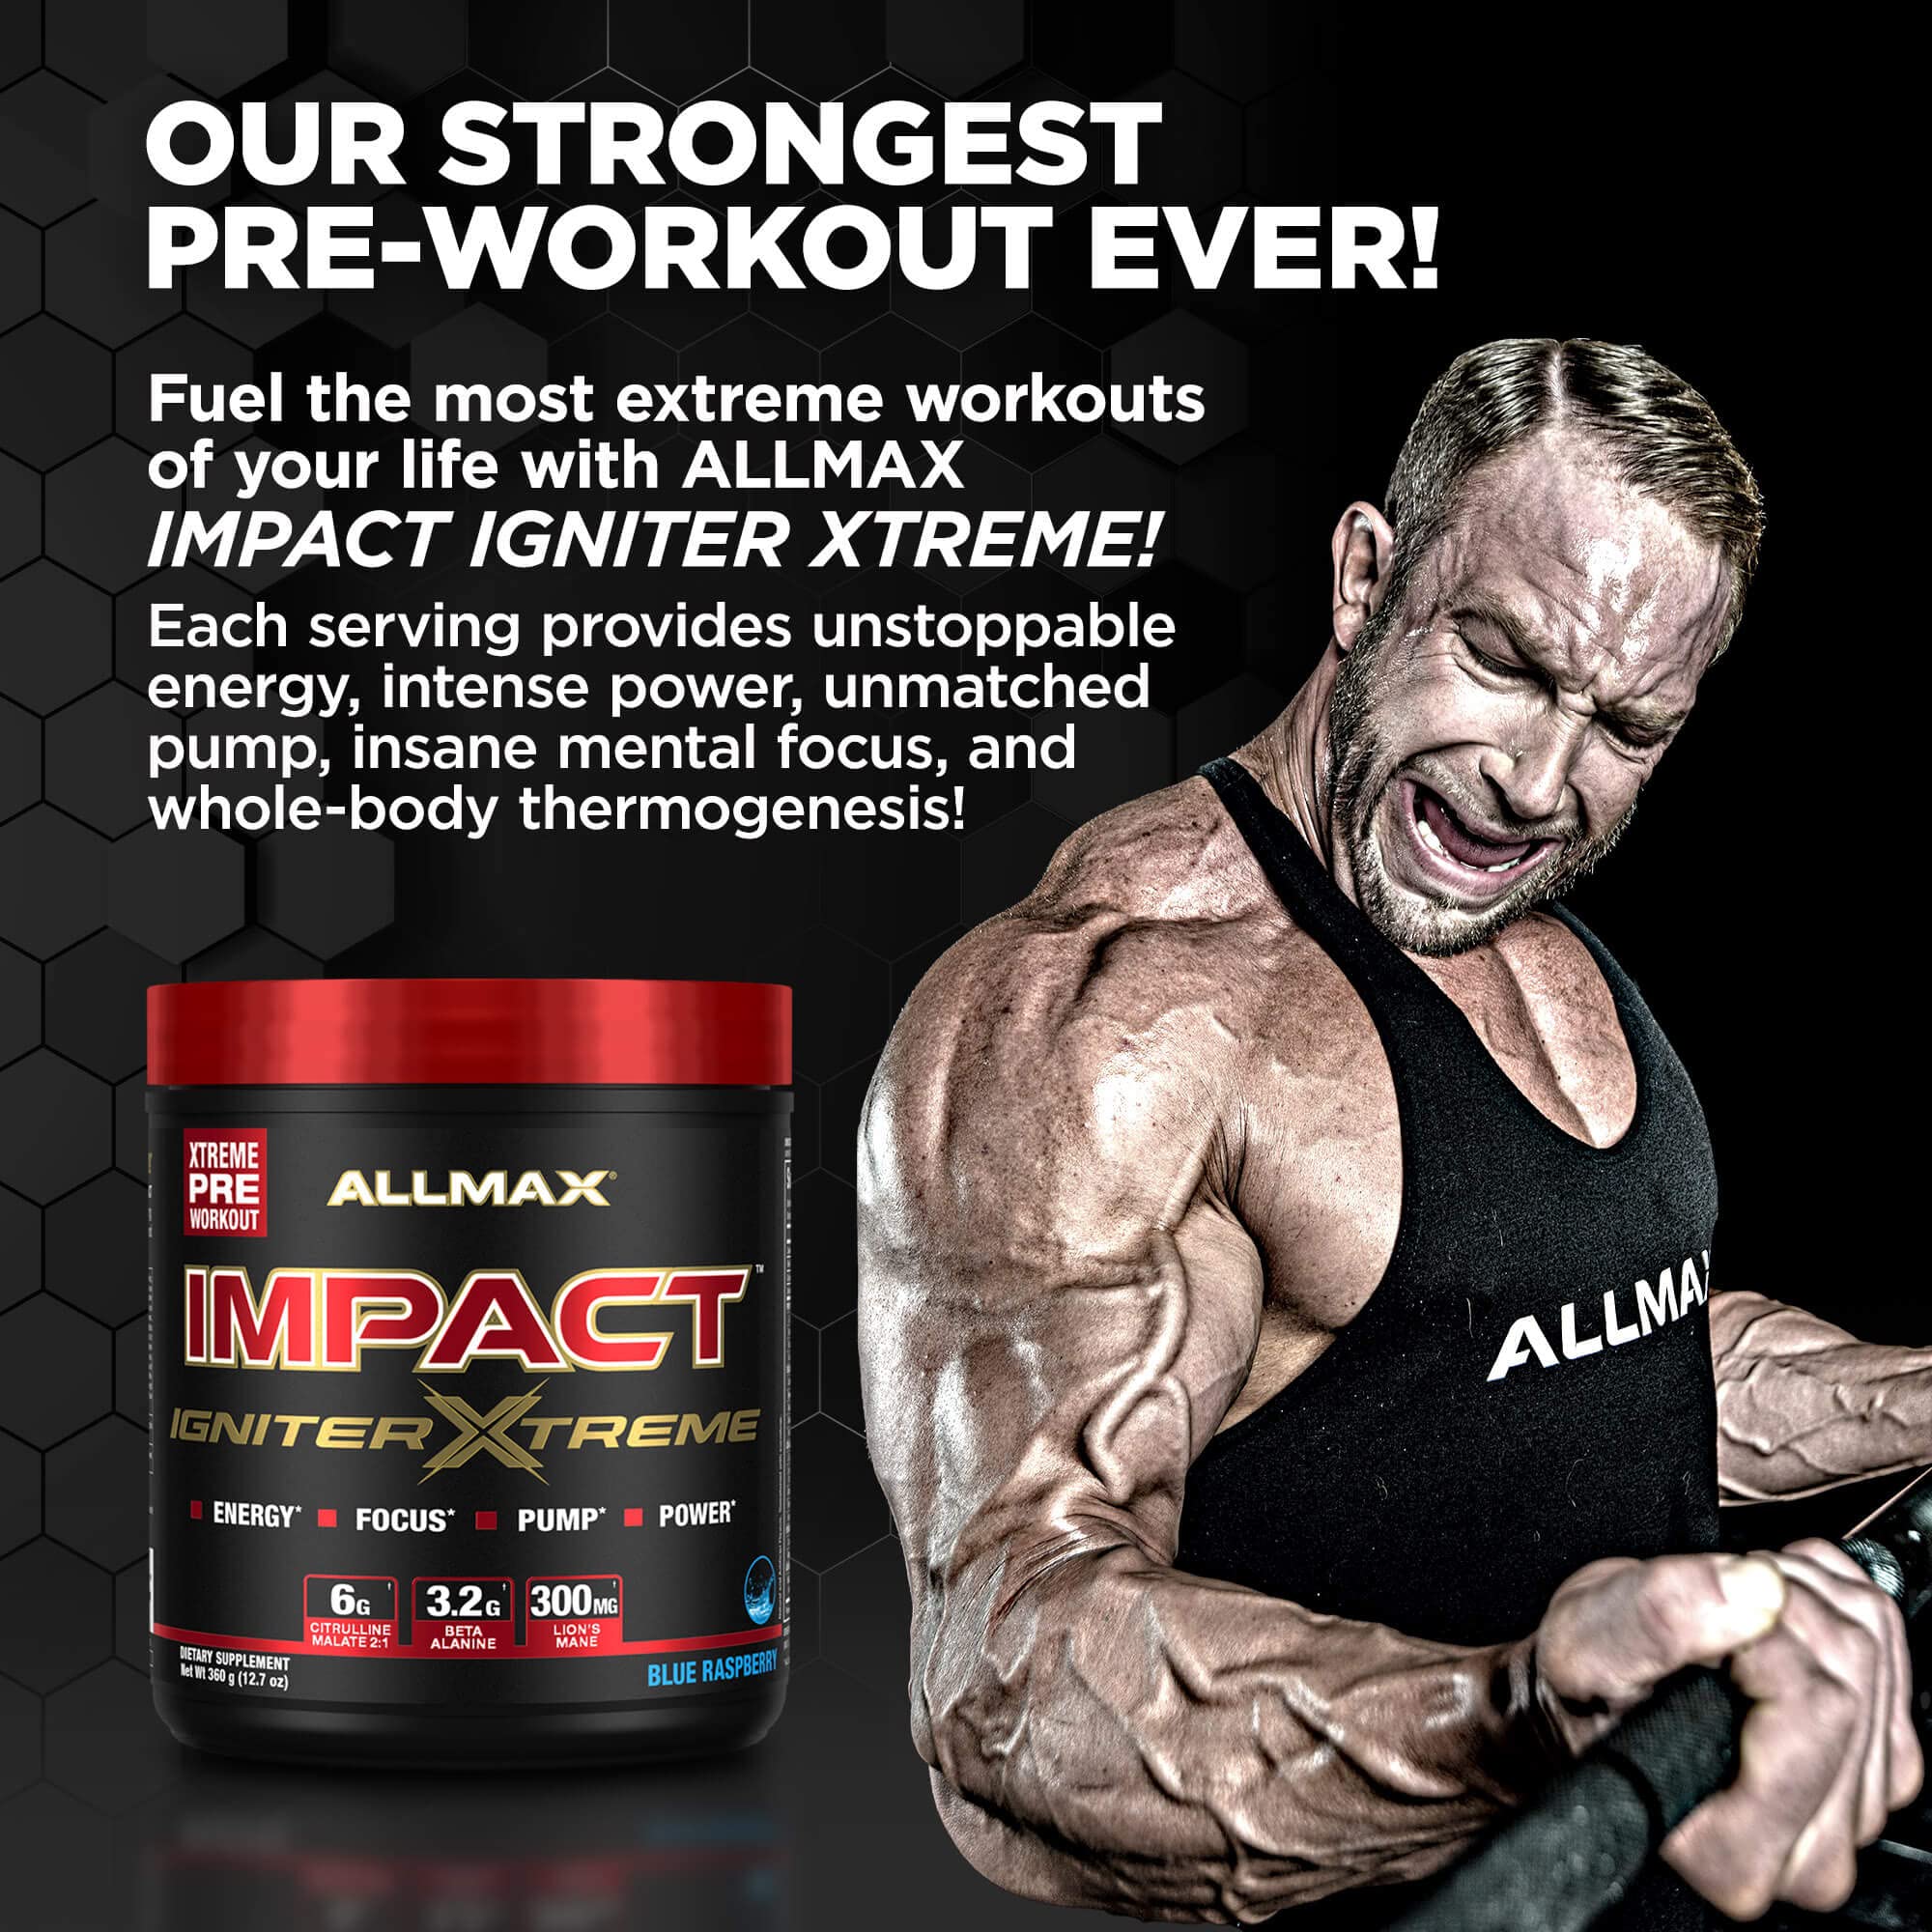 ALLMAX Impact IGNITER Xtreme, Pineapple Mango - 360 g - Pre-Workout Formula - Improves Energy, Focus, Pumps & Power - with Citrulline Malate & Beta Alanine - Up to 40 Servings